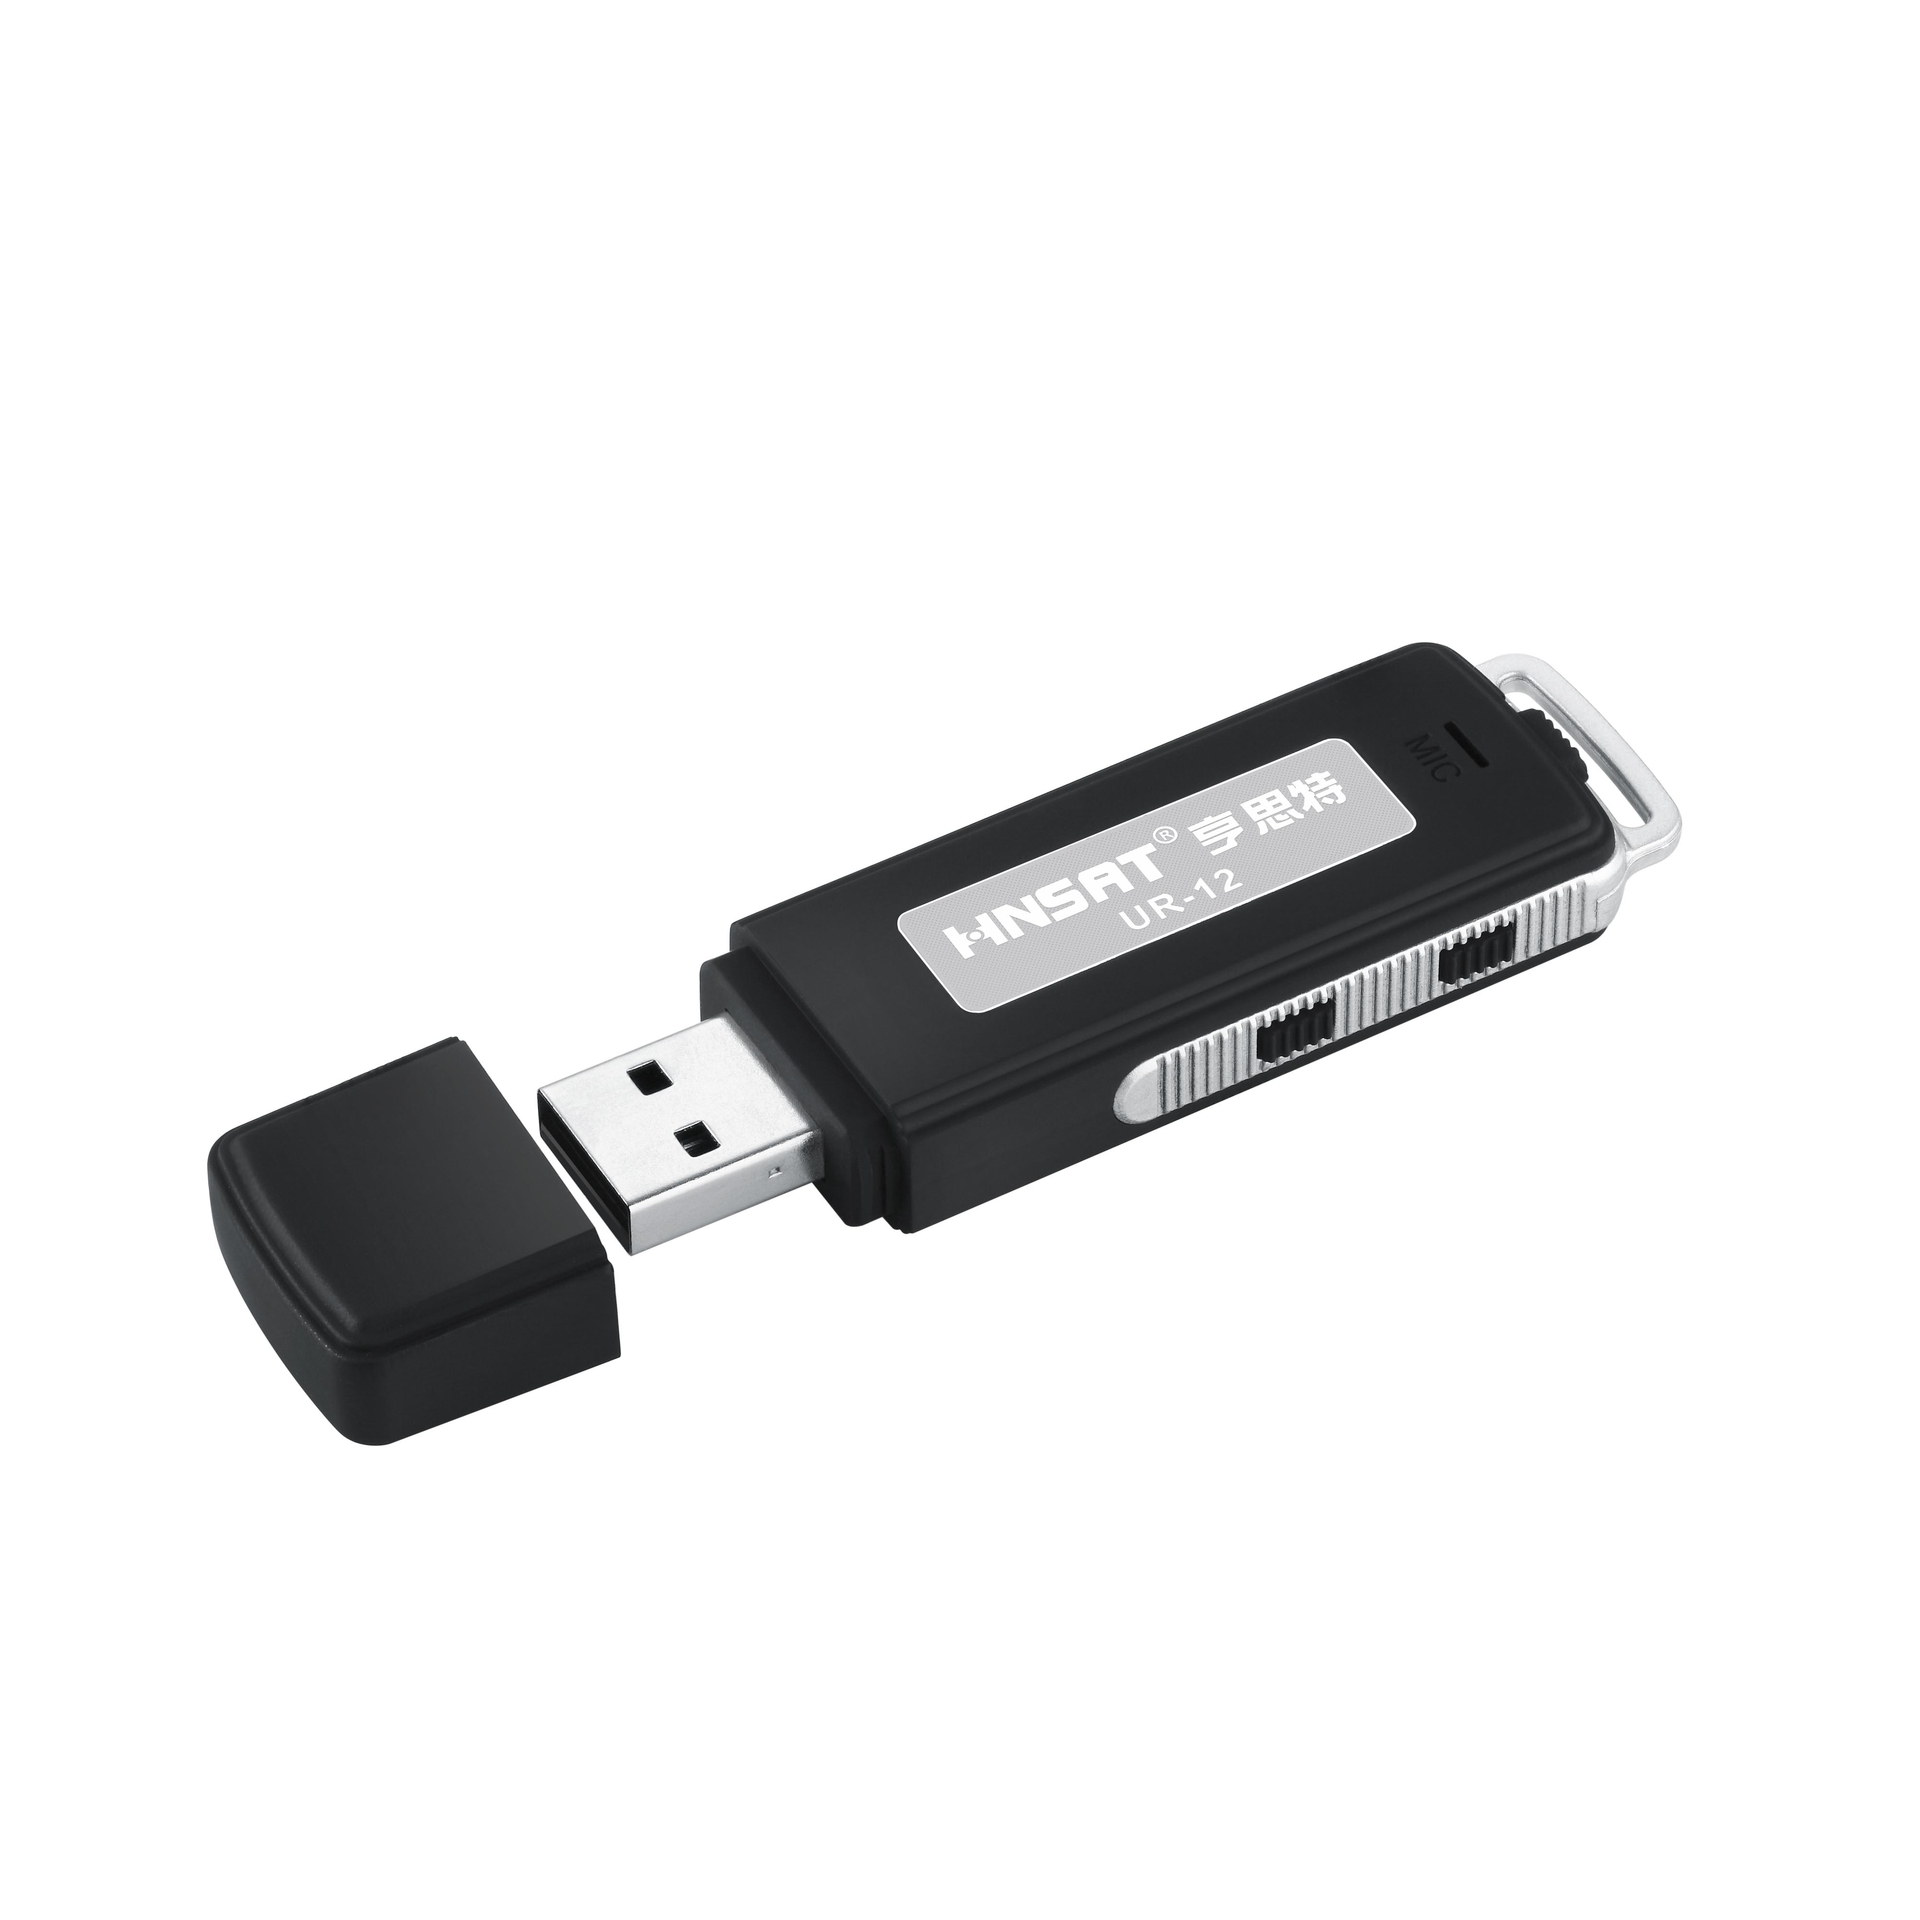 product-USB recorder flash drive hides spy gadgets with music playback-Hnsat-img-1